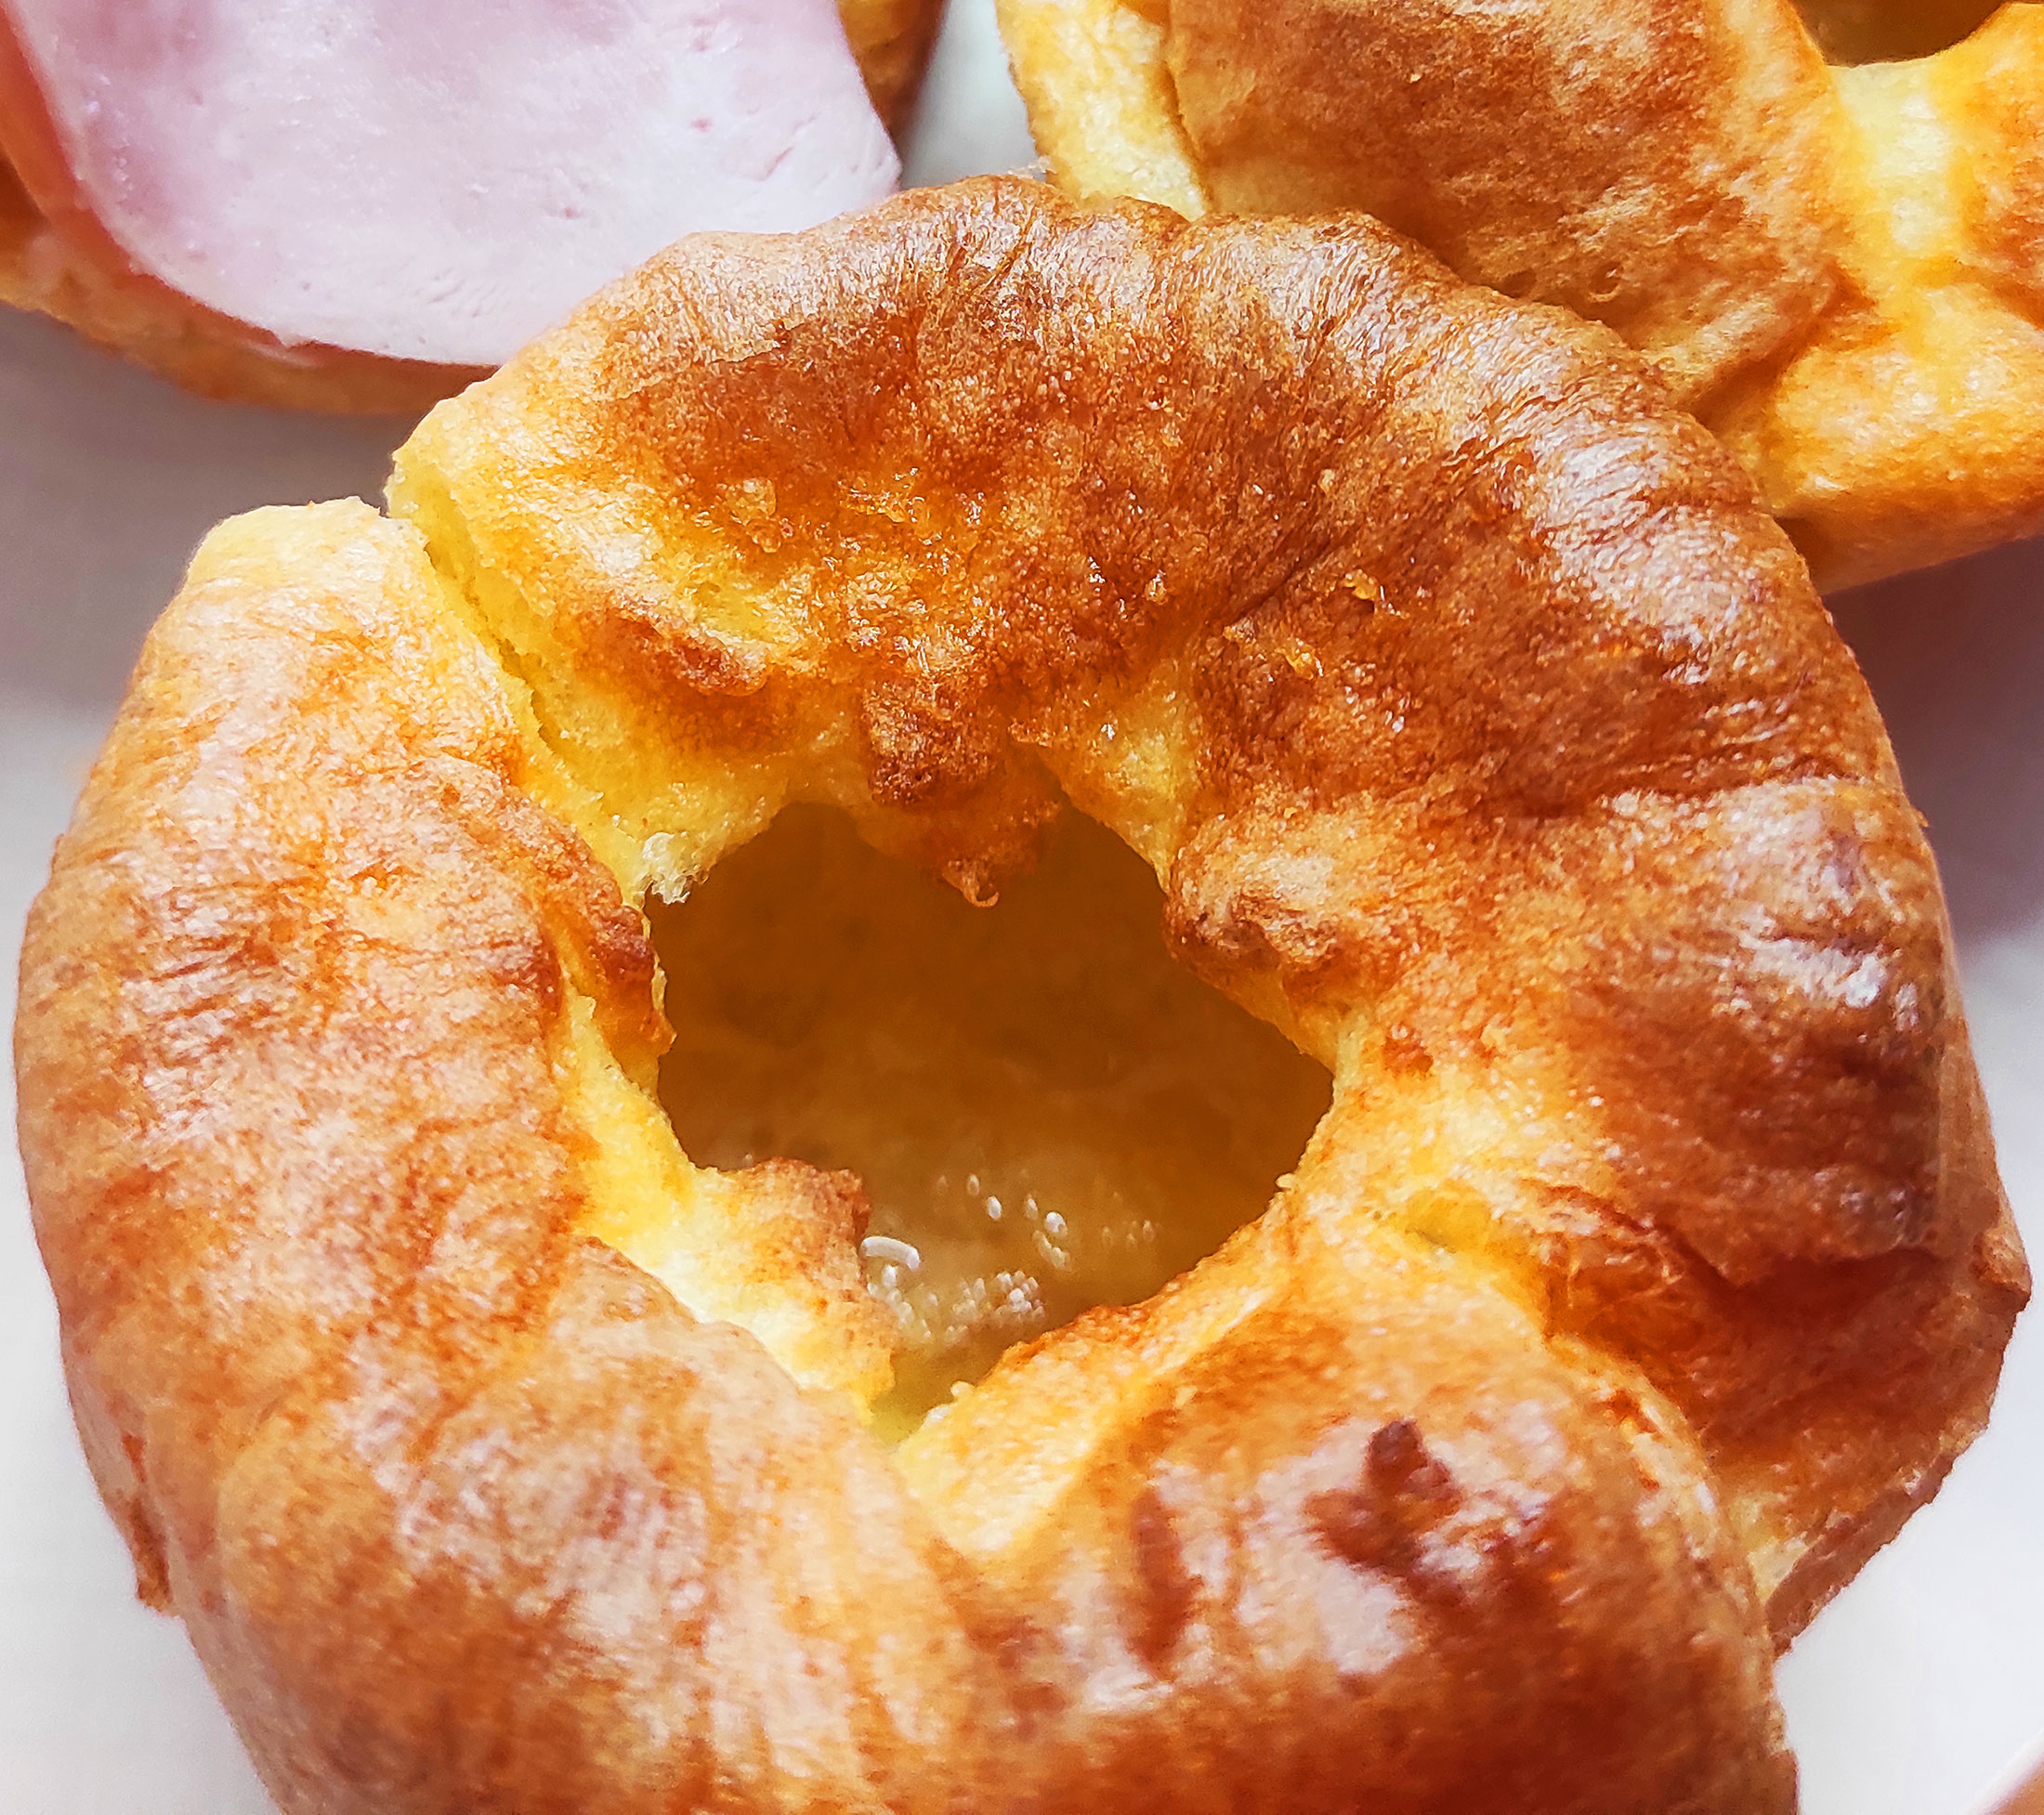 Jamie Oliver's Yorkshire pudding cooked in a frying pan recipe